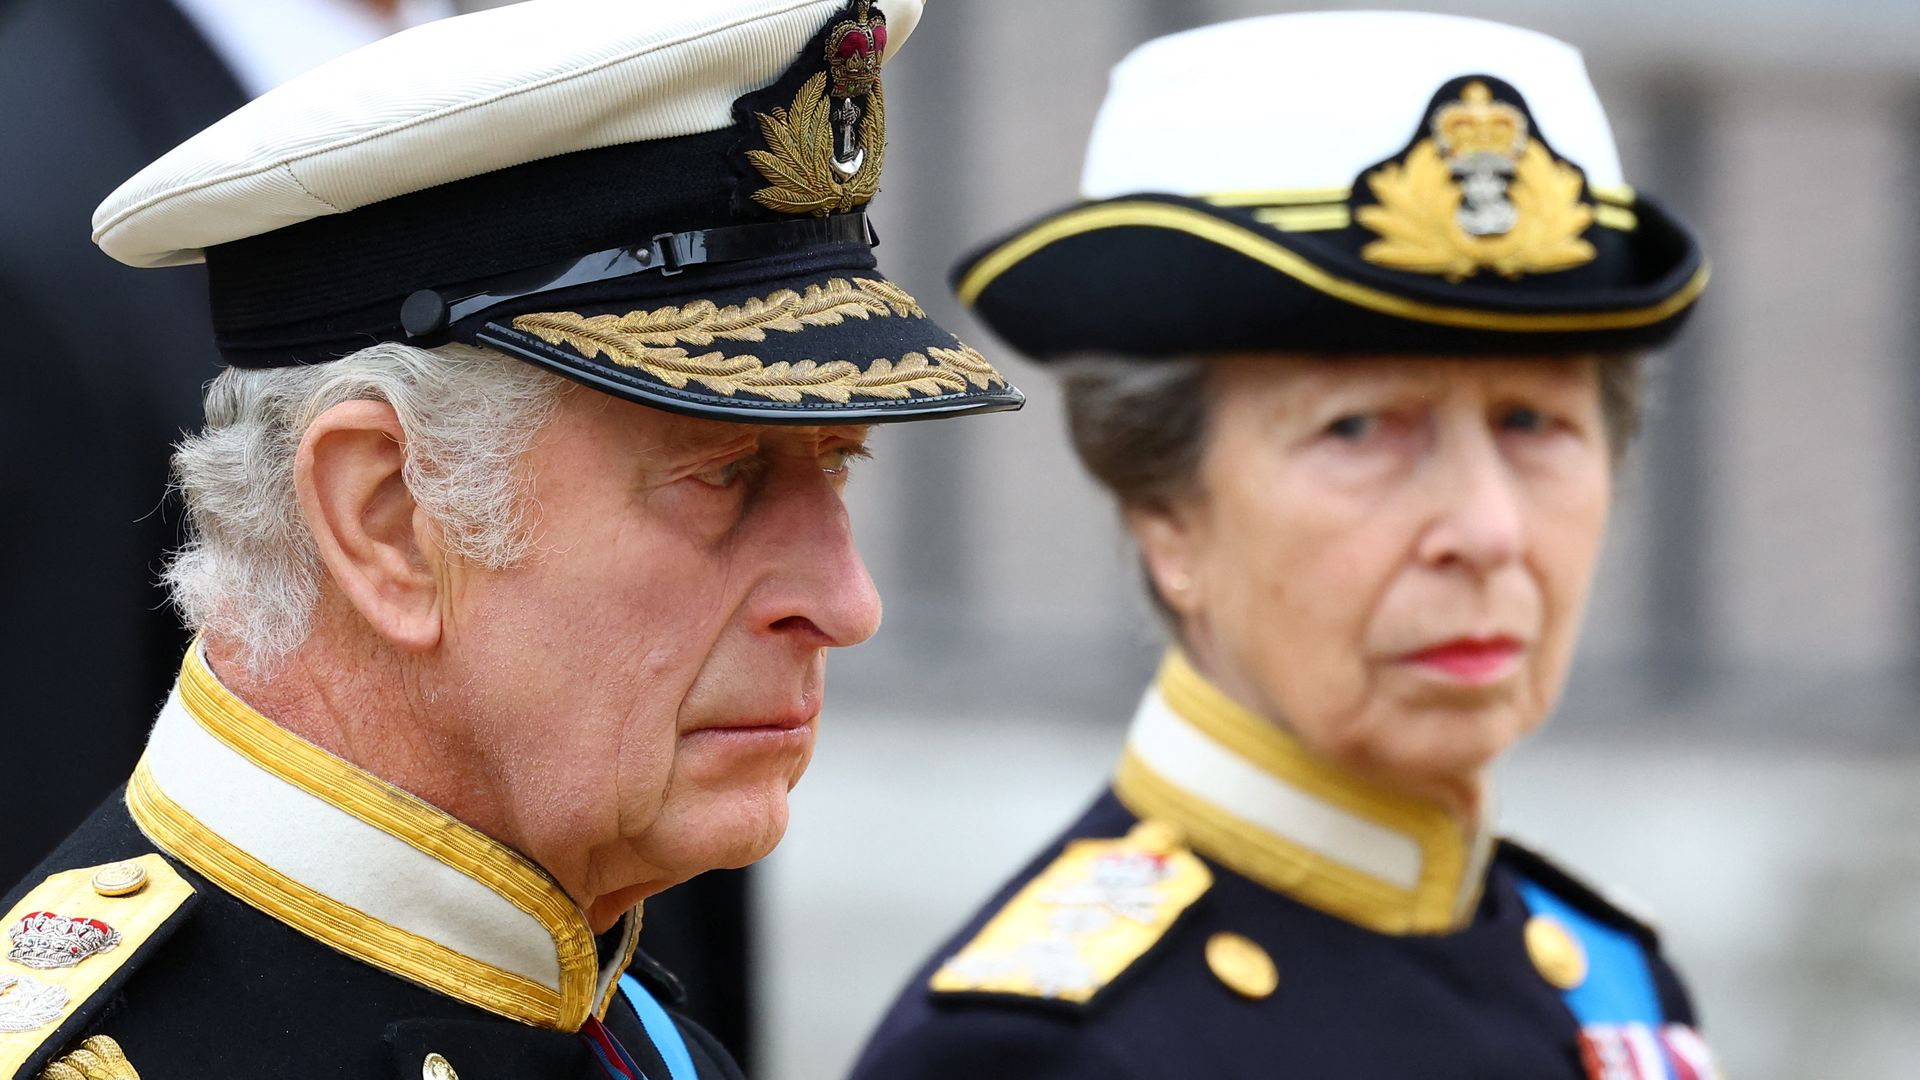 Princess Anne and King Charles in military attire at The State Funeral Of Queen Elizabeth II